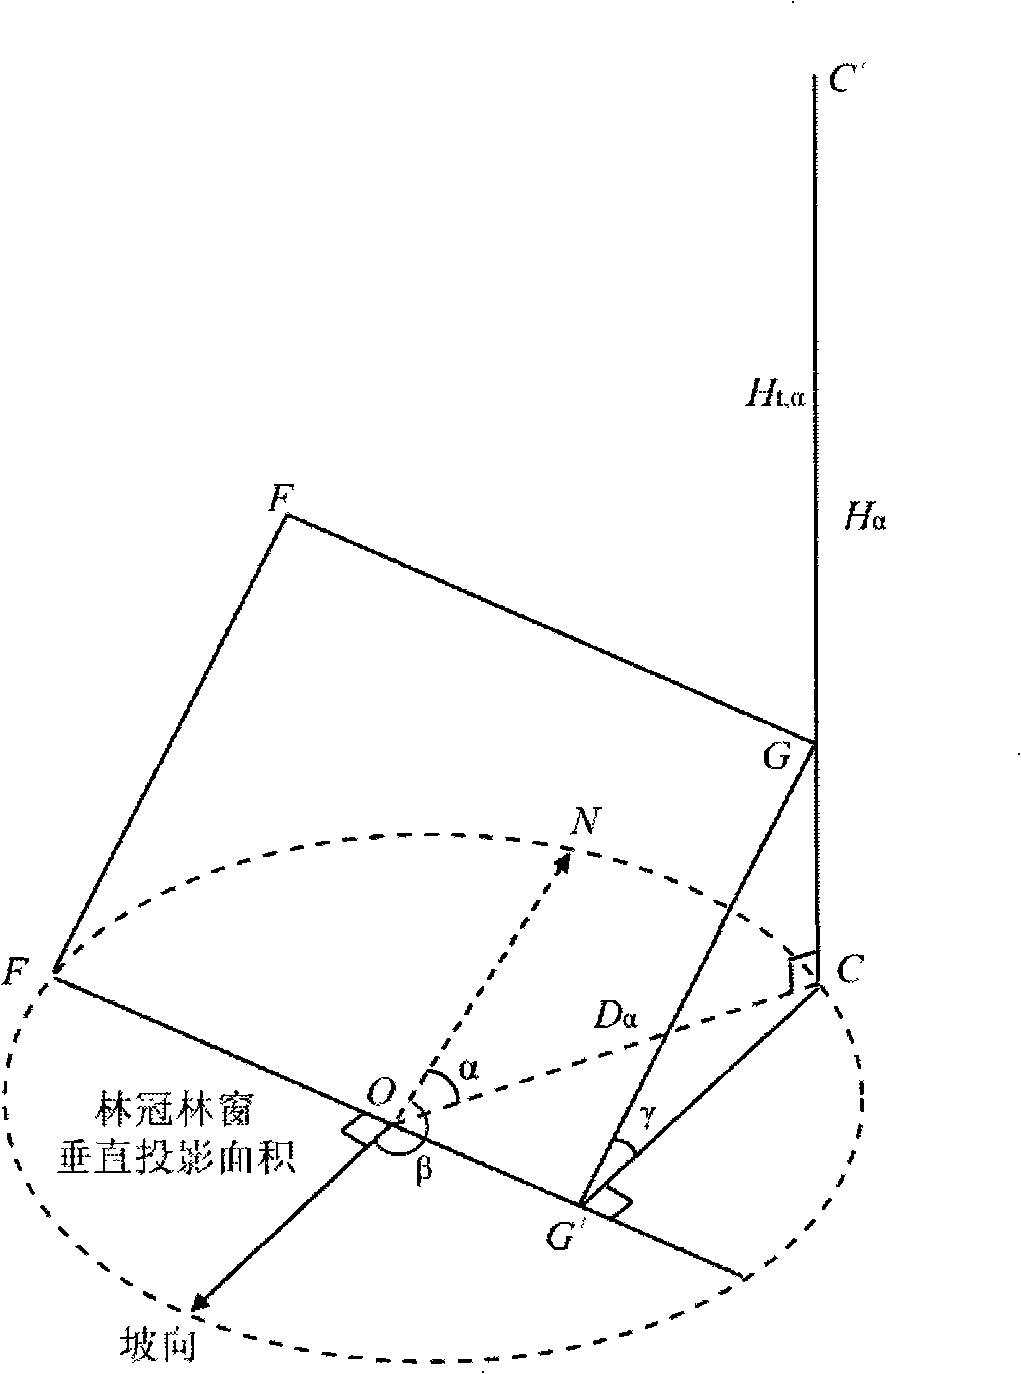 Method for measuring three-dimensional structure of forest gap